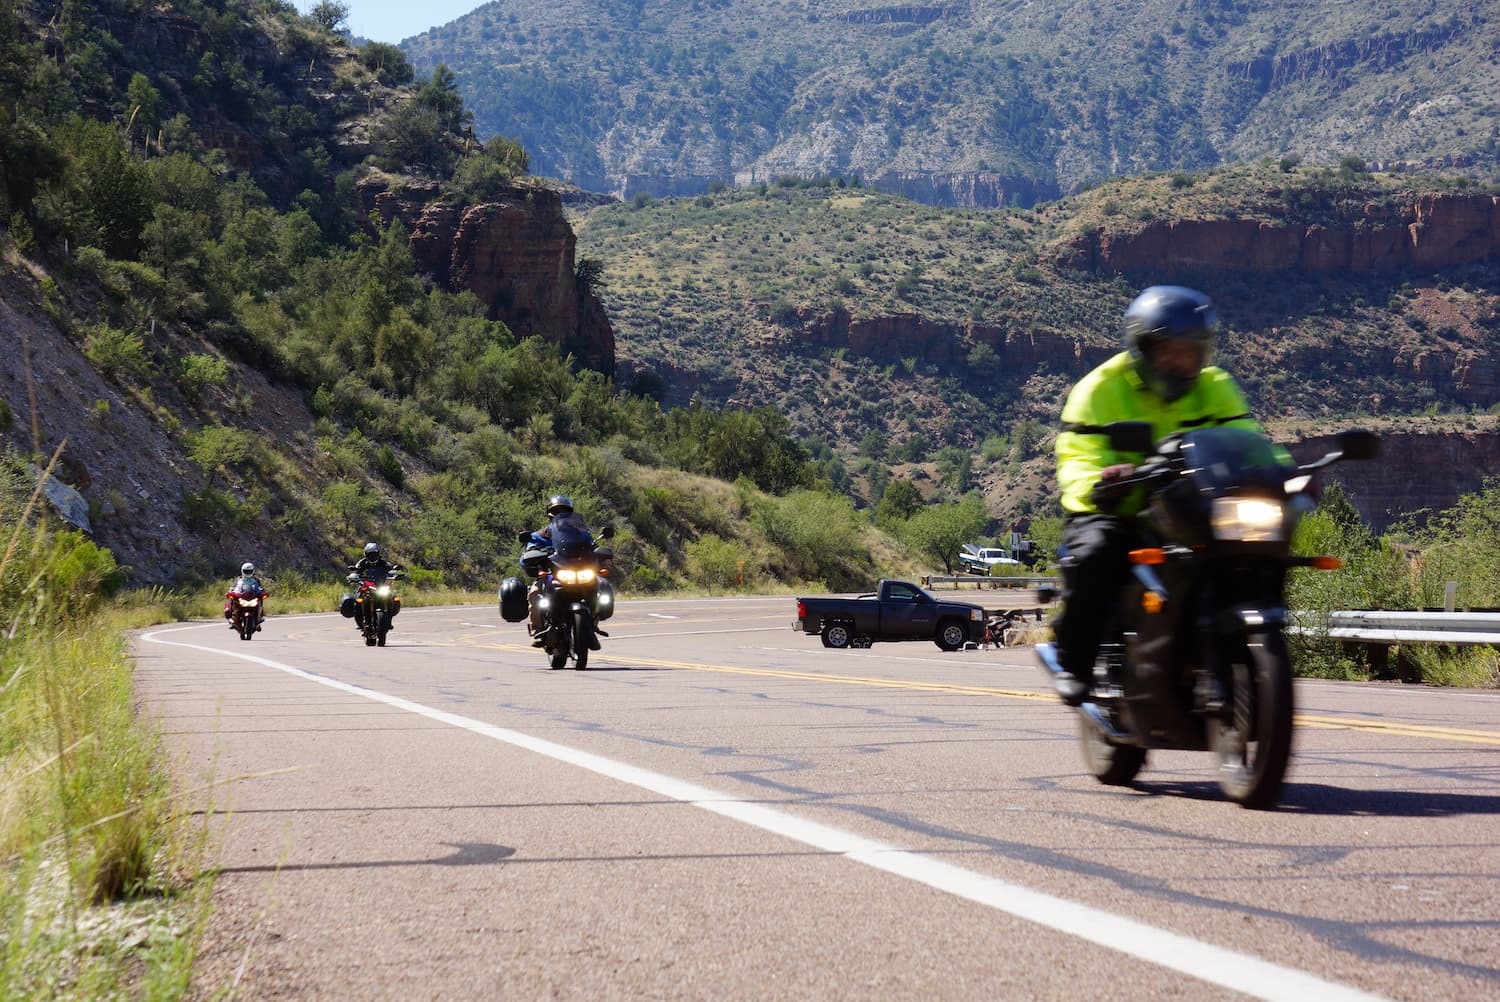 motorcycle riders on the highway in Arizona